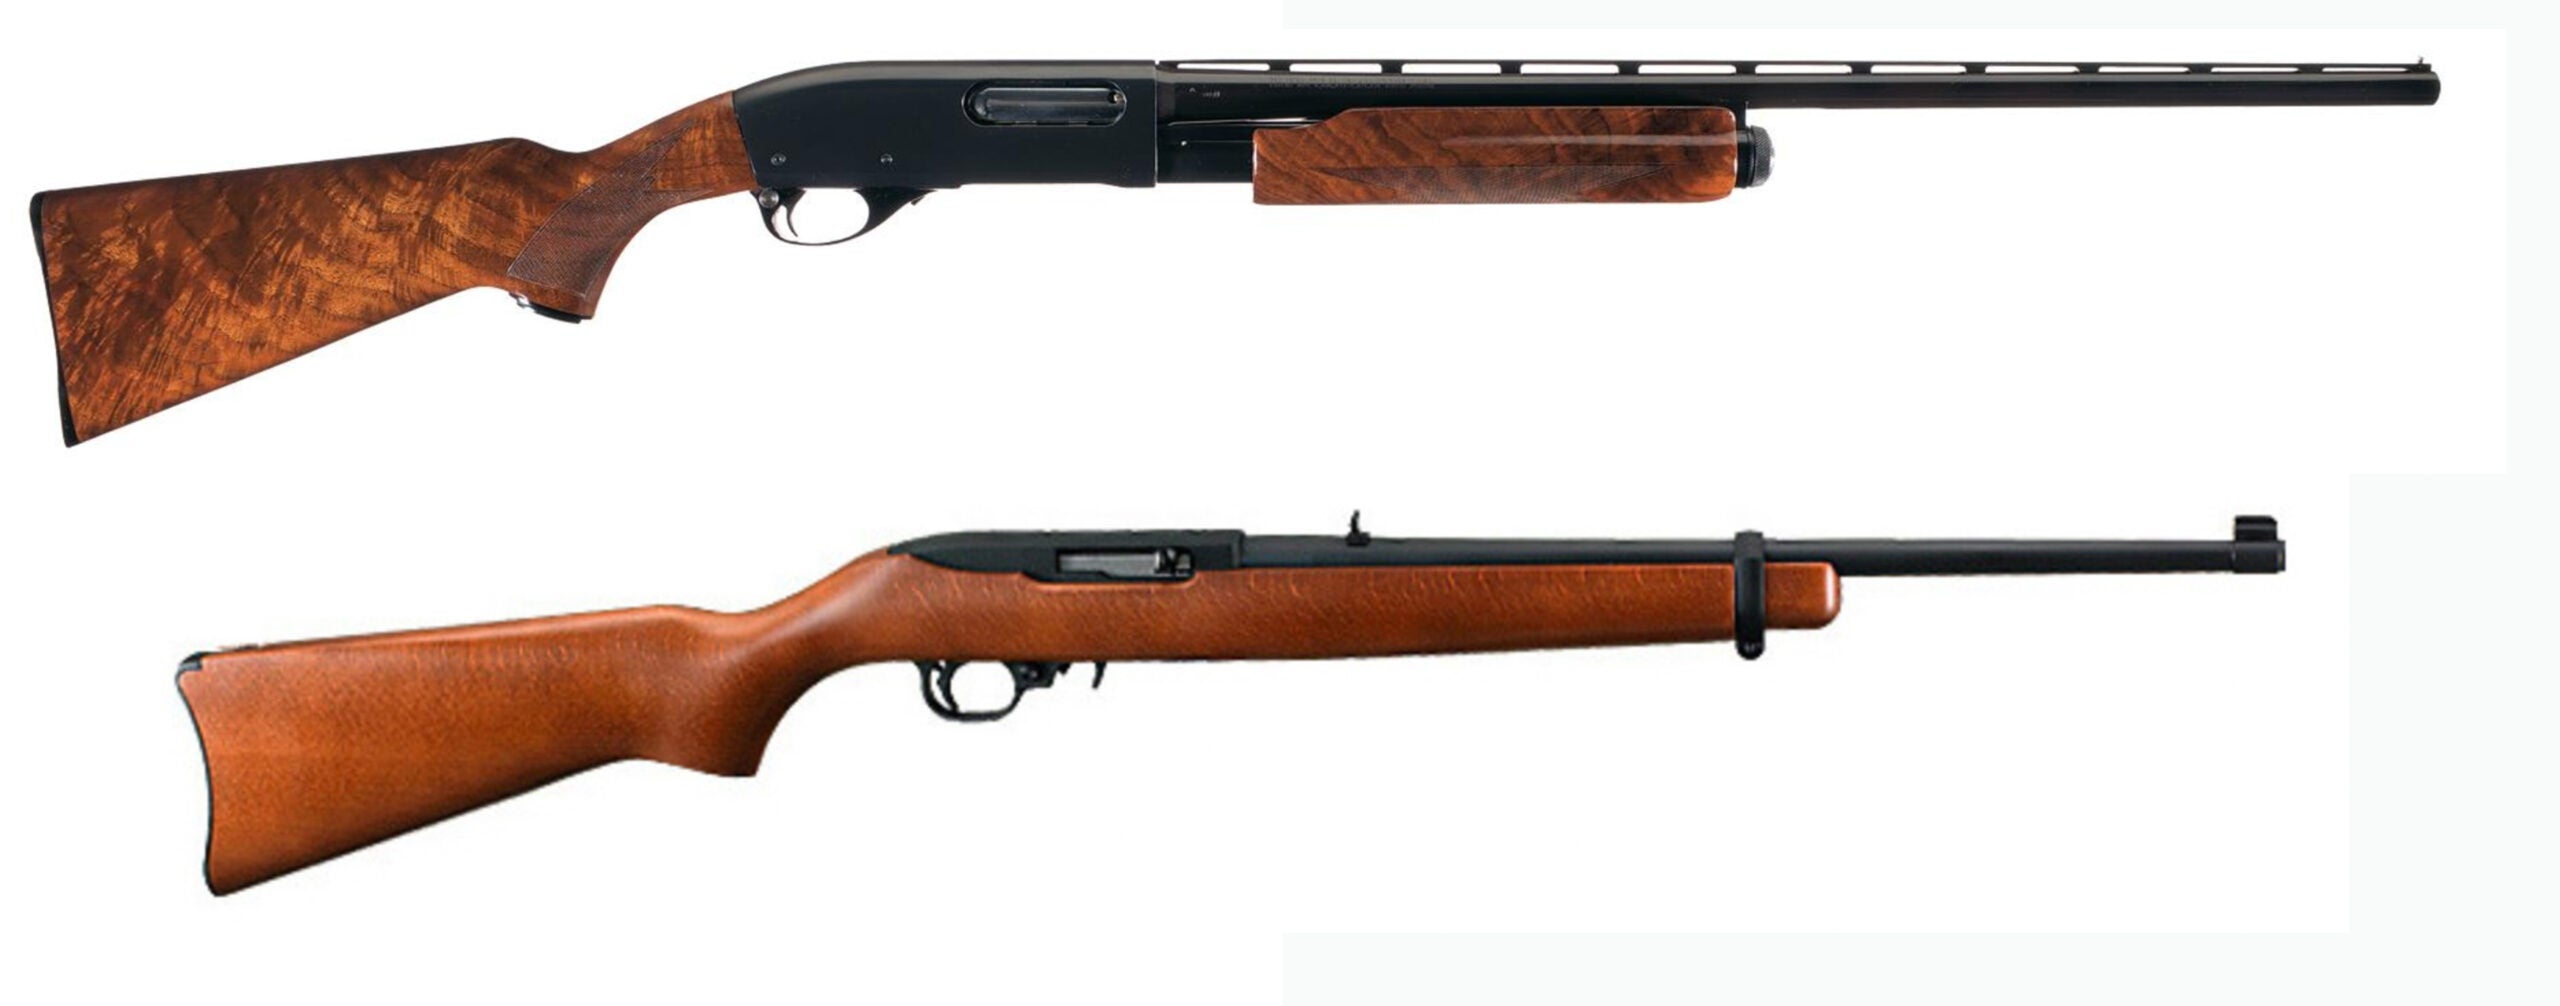 photo of two popular guns for how to hunt rabbits